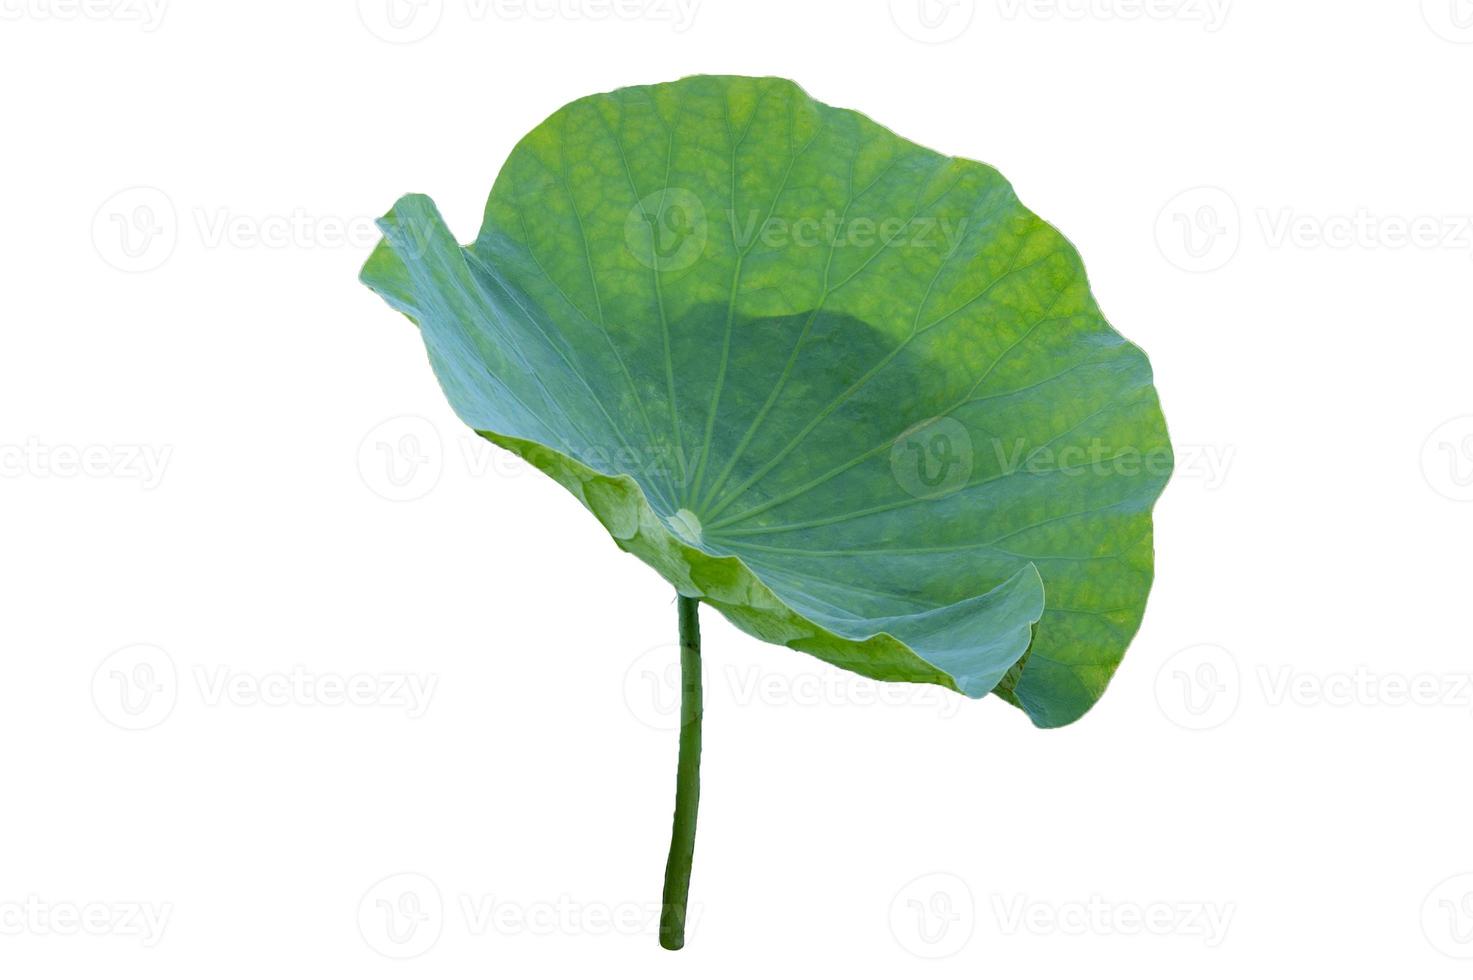 Lotus leaf Isolate collection of white background photo